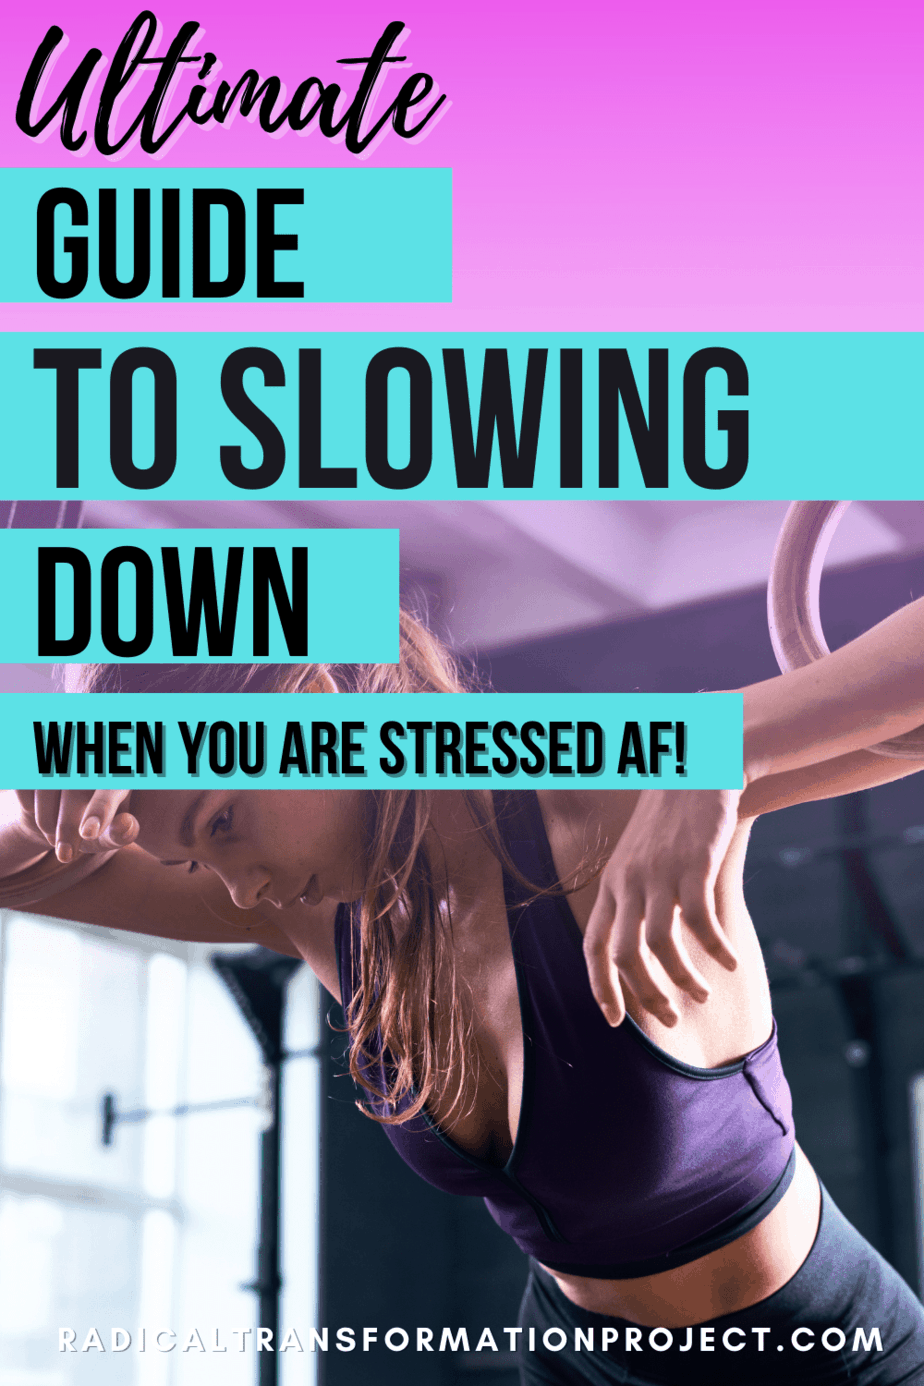 The Ultimate Guide to Slowing Down